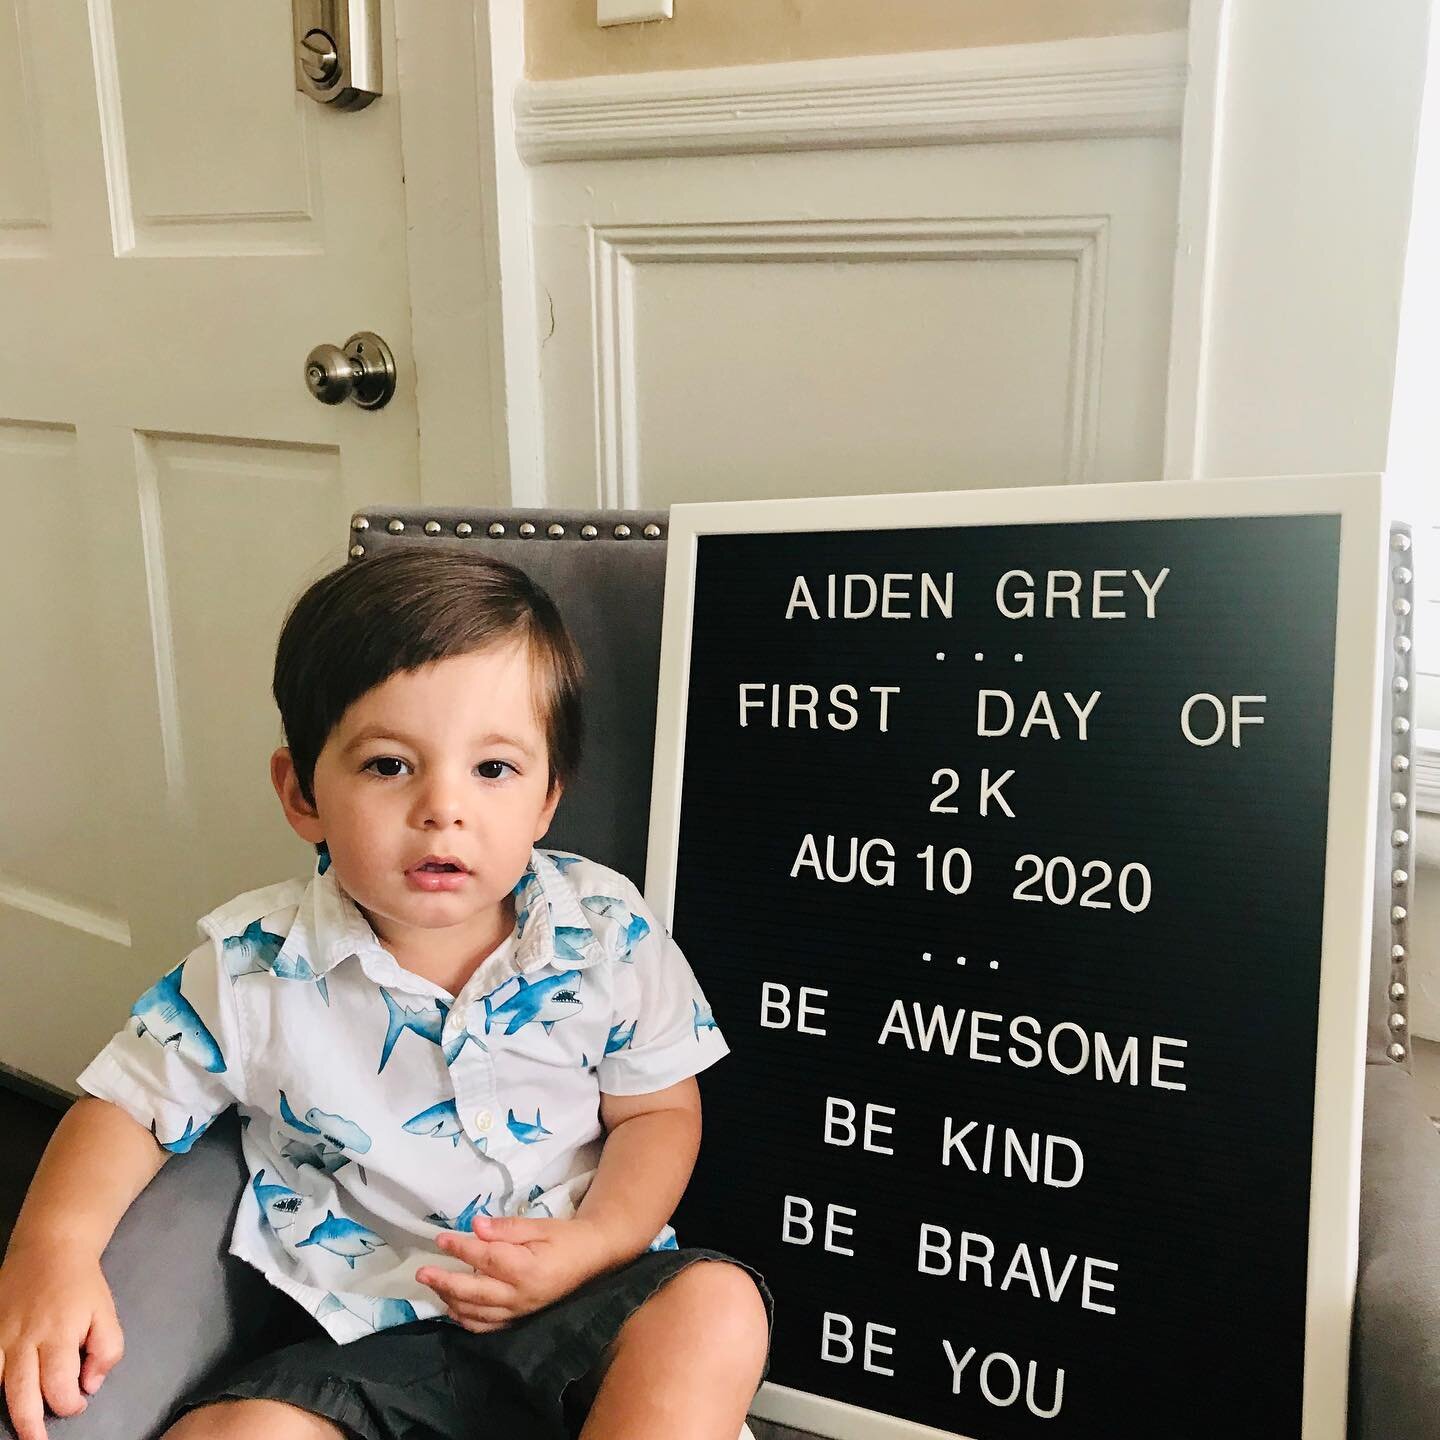 Our boy is growing up! Already in 2K! And he loved it... after the initial cry-fest going into the classroom! #AdventuresWithAiden